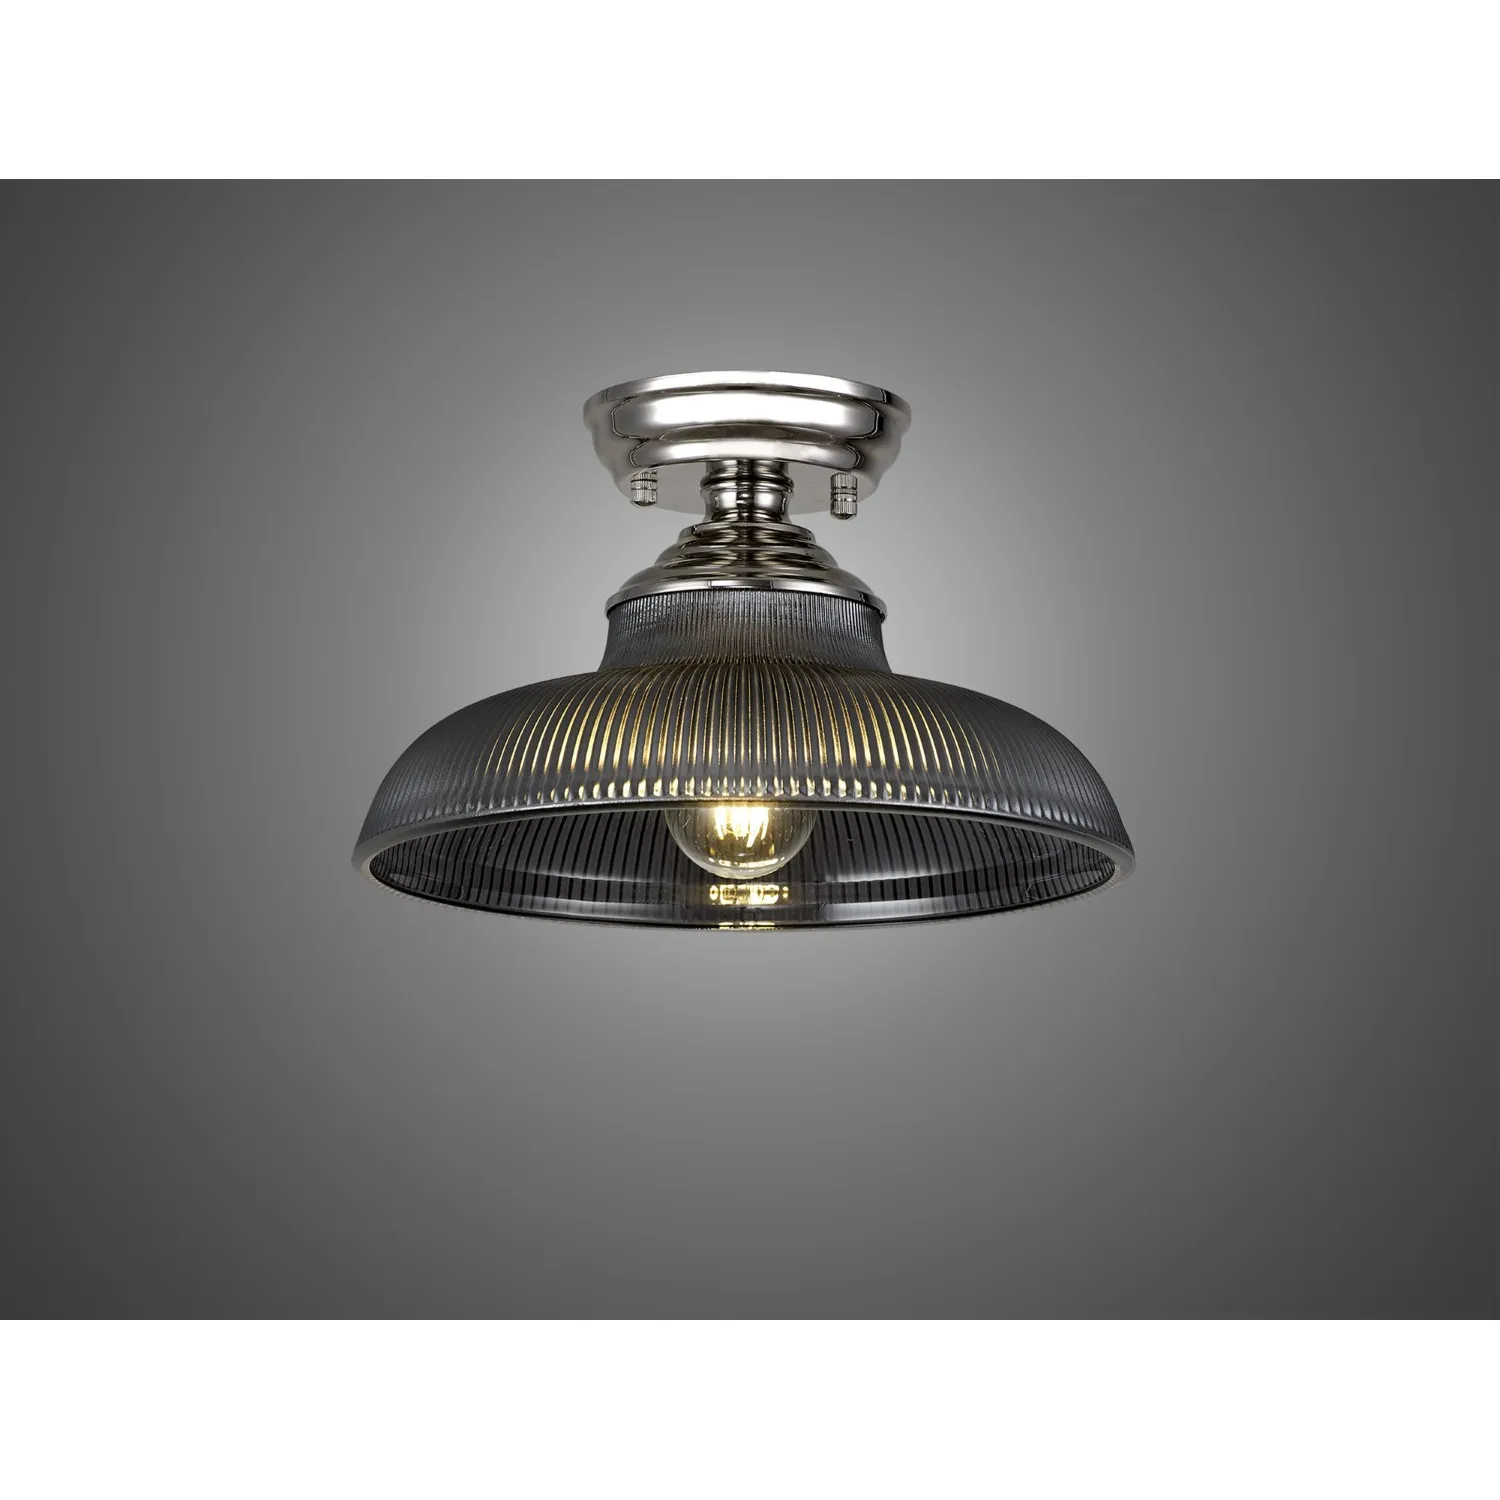 Billericay 1 Light Flush Ceiling E27 With Round 30cm Glass Shade Polished Nickel Smoked